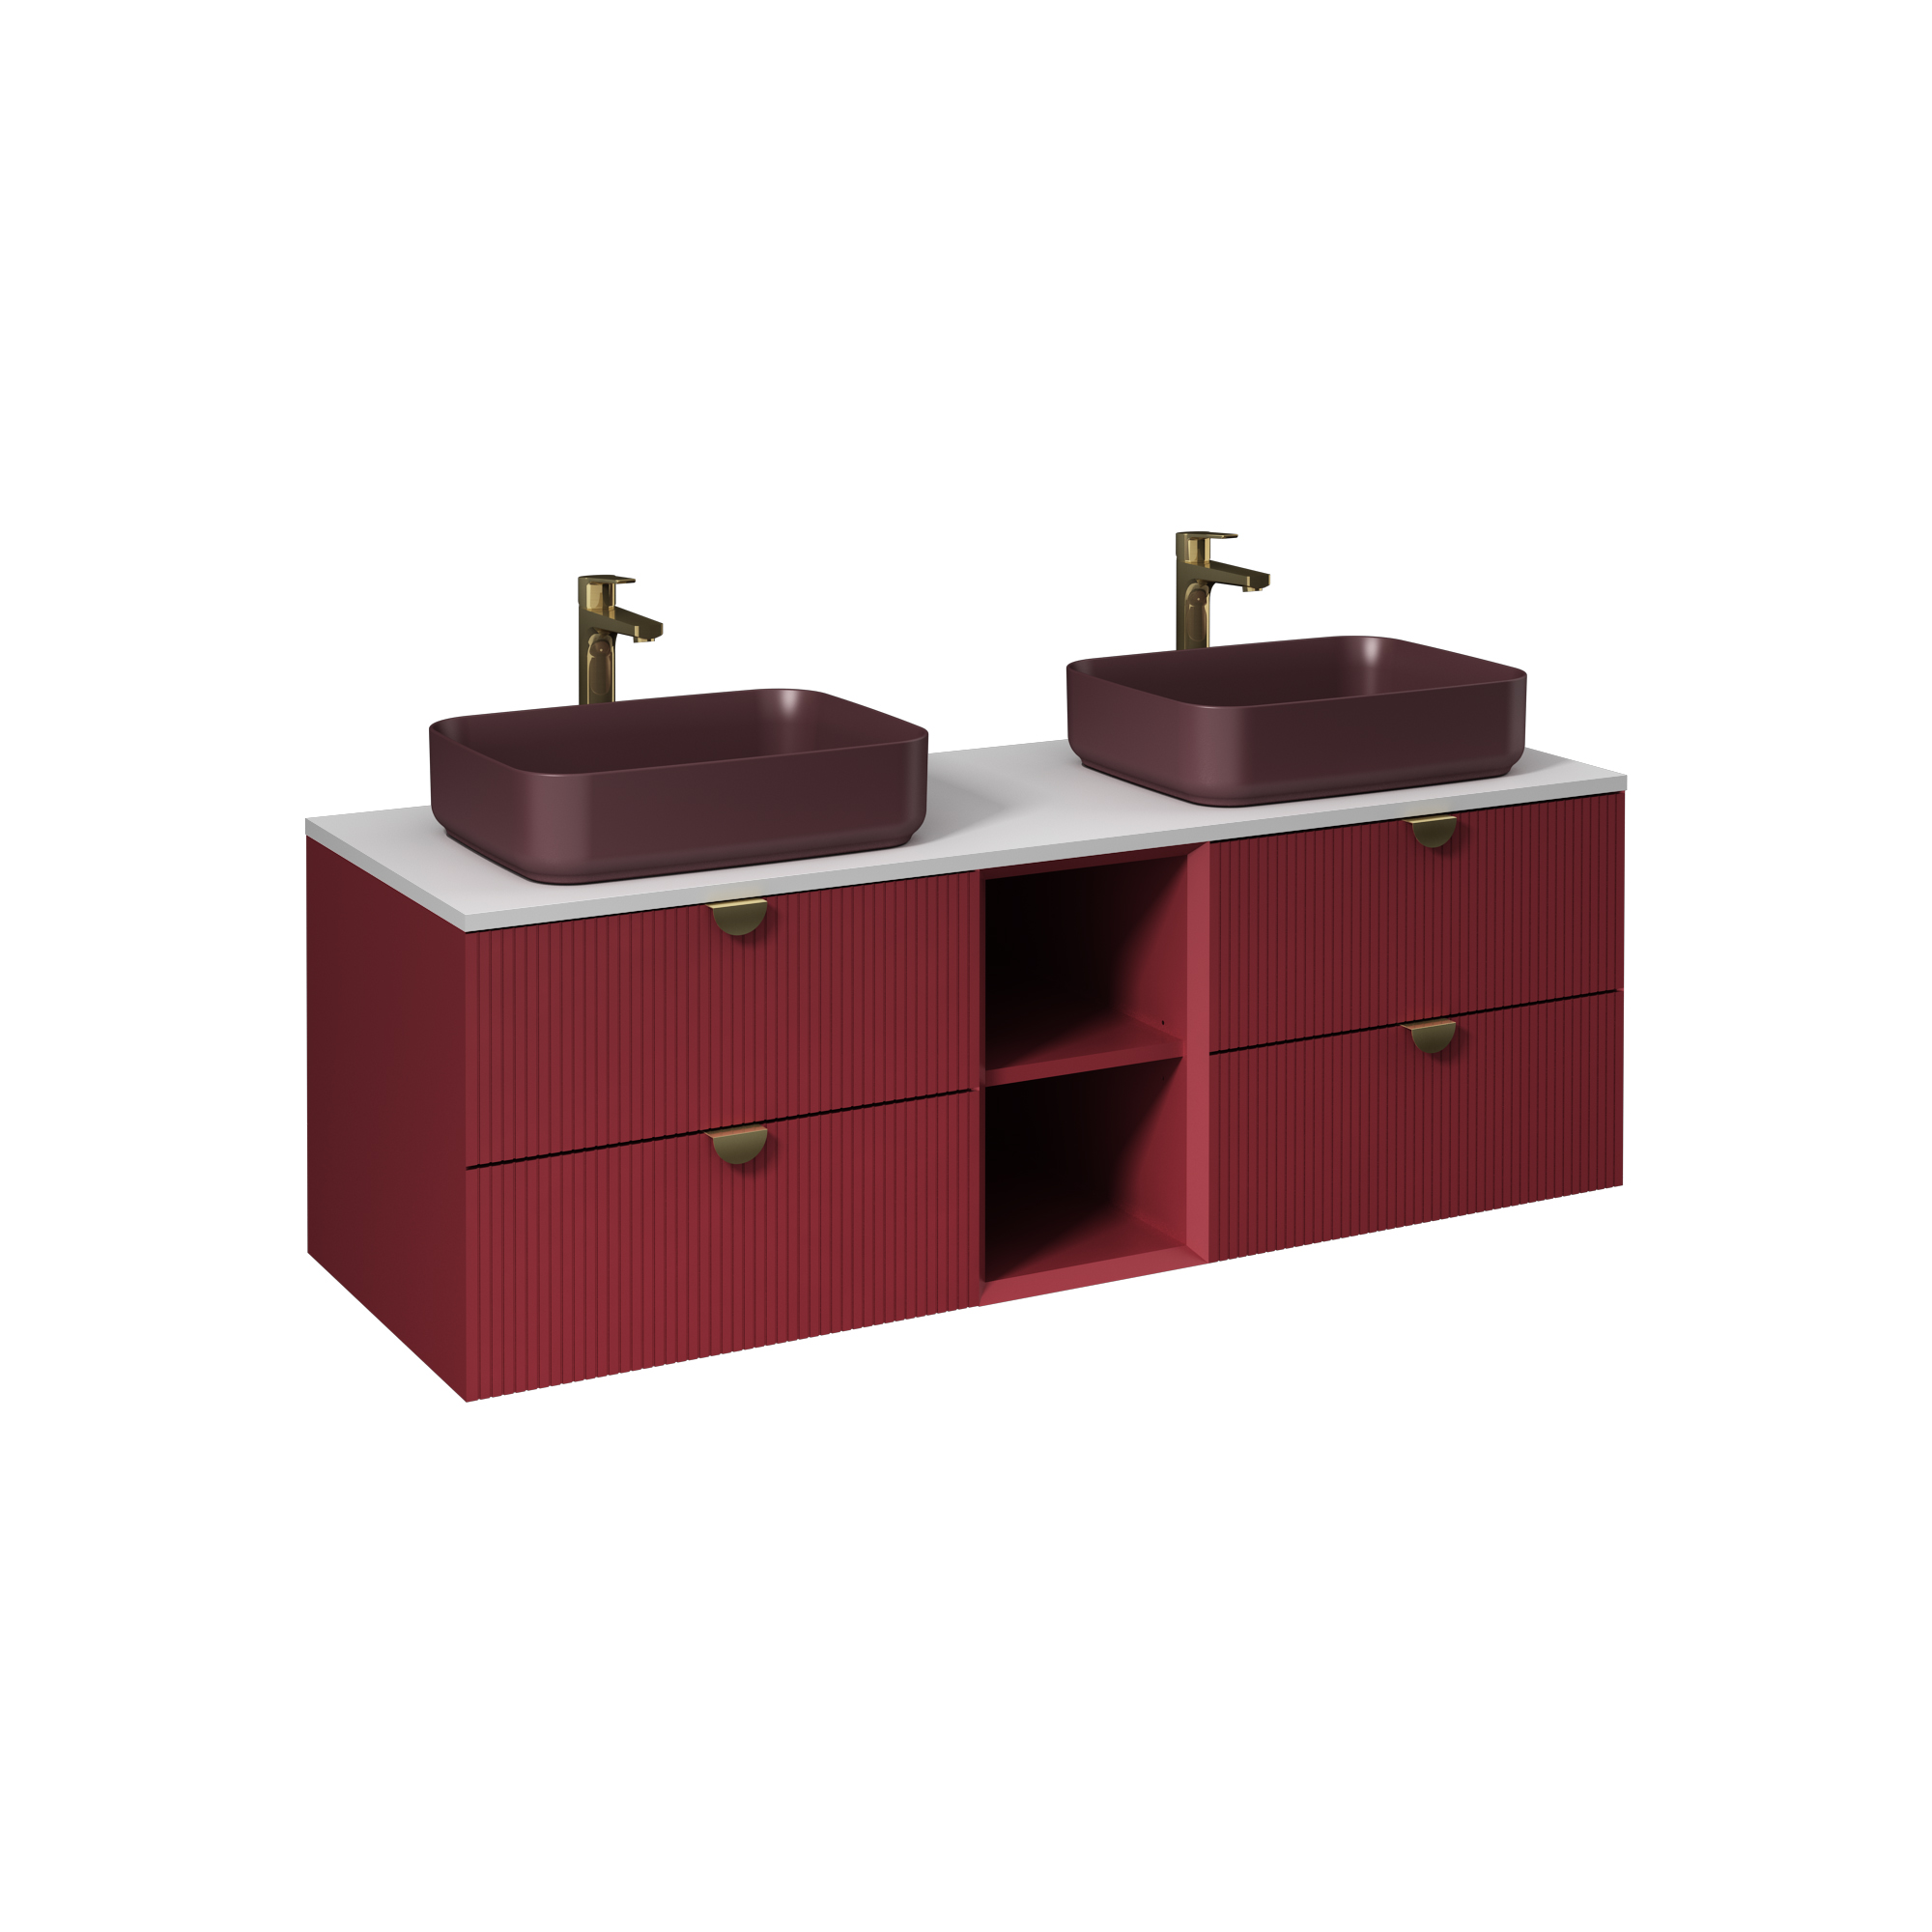 Infinity  Washbasin Cabinet Ruby Red, with Rustic Maroon Washbasin 59"